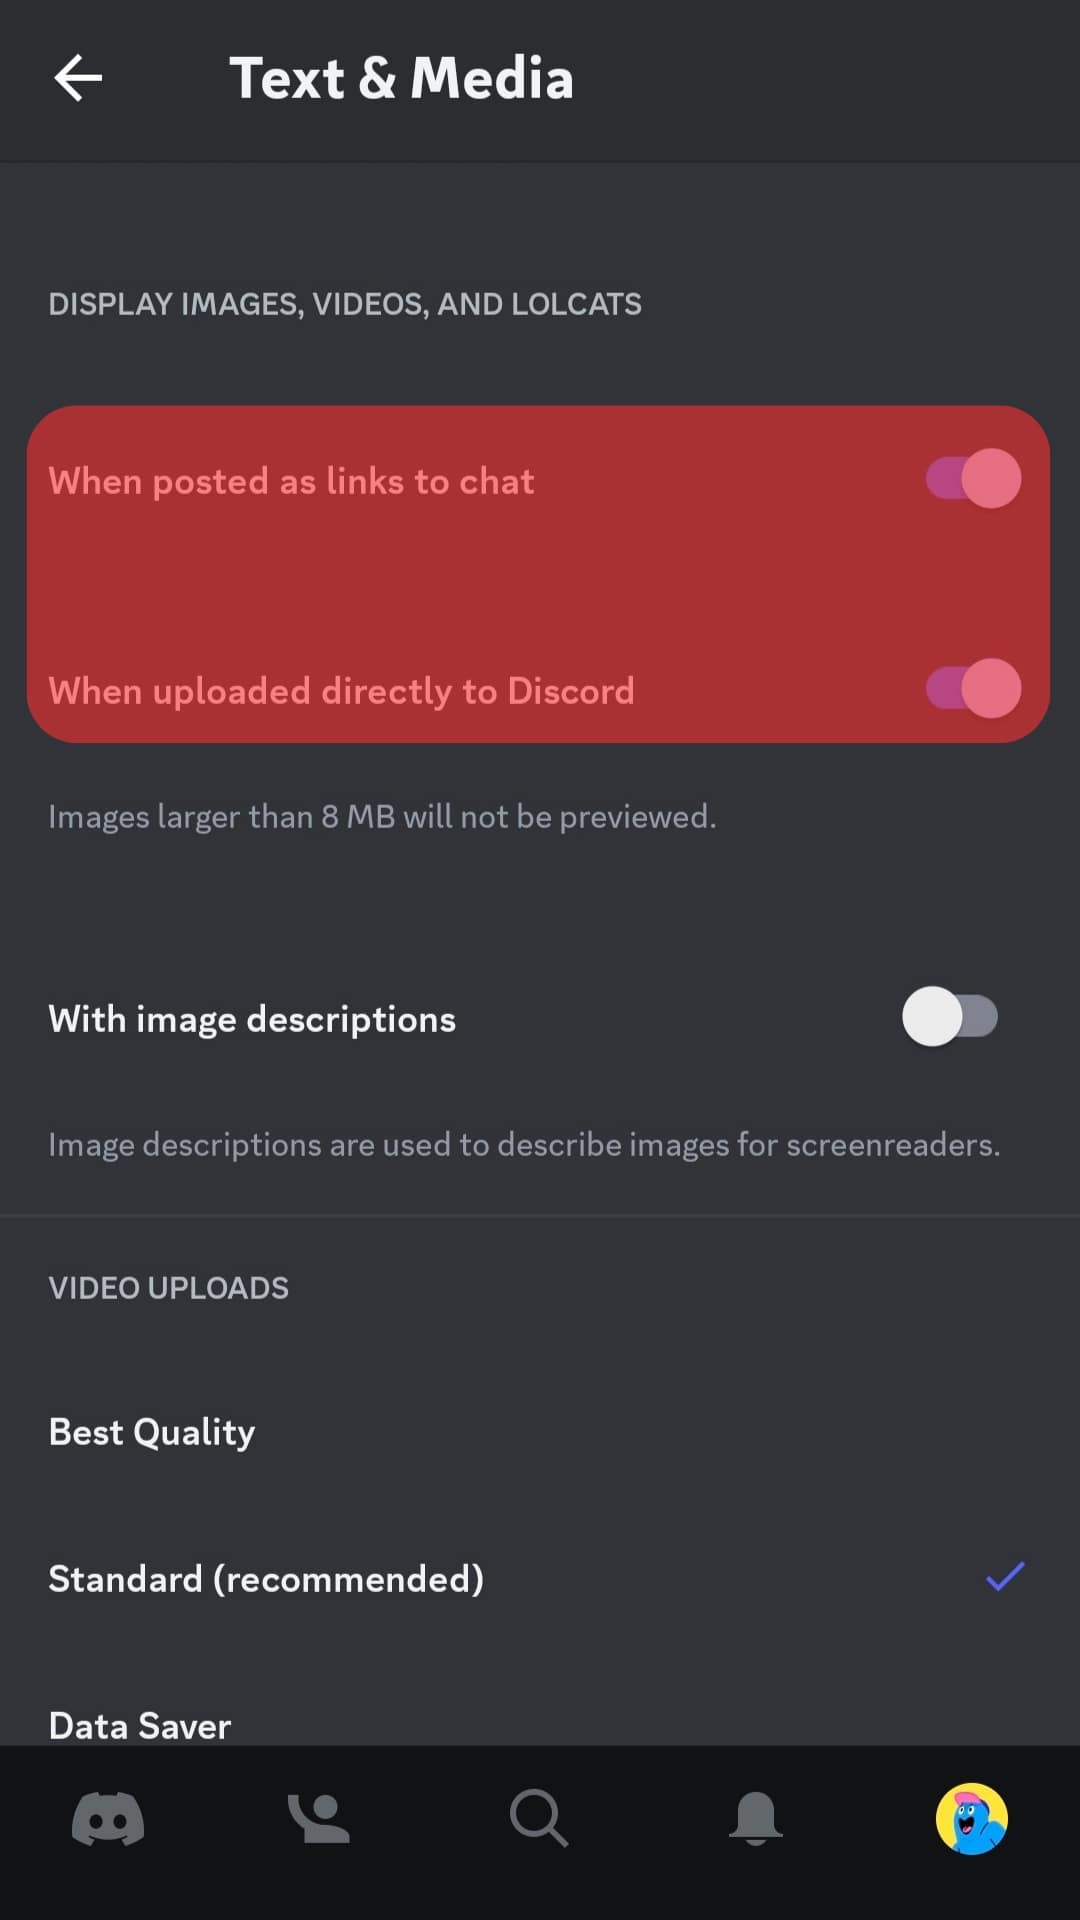 Disable The Options For When Posted As Links To Chat And When Uploaded Directly To Discord.